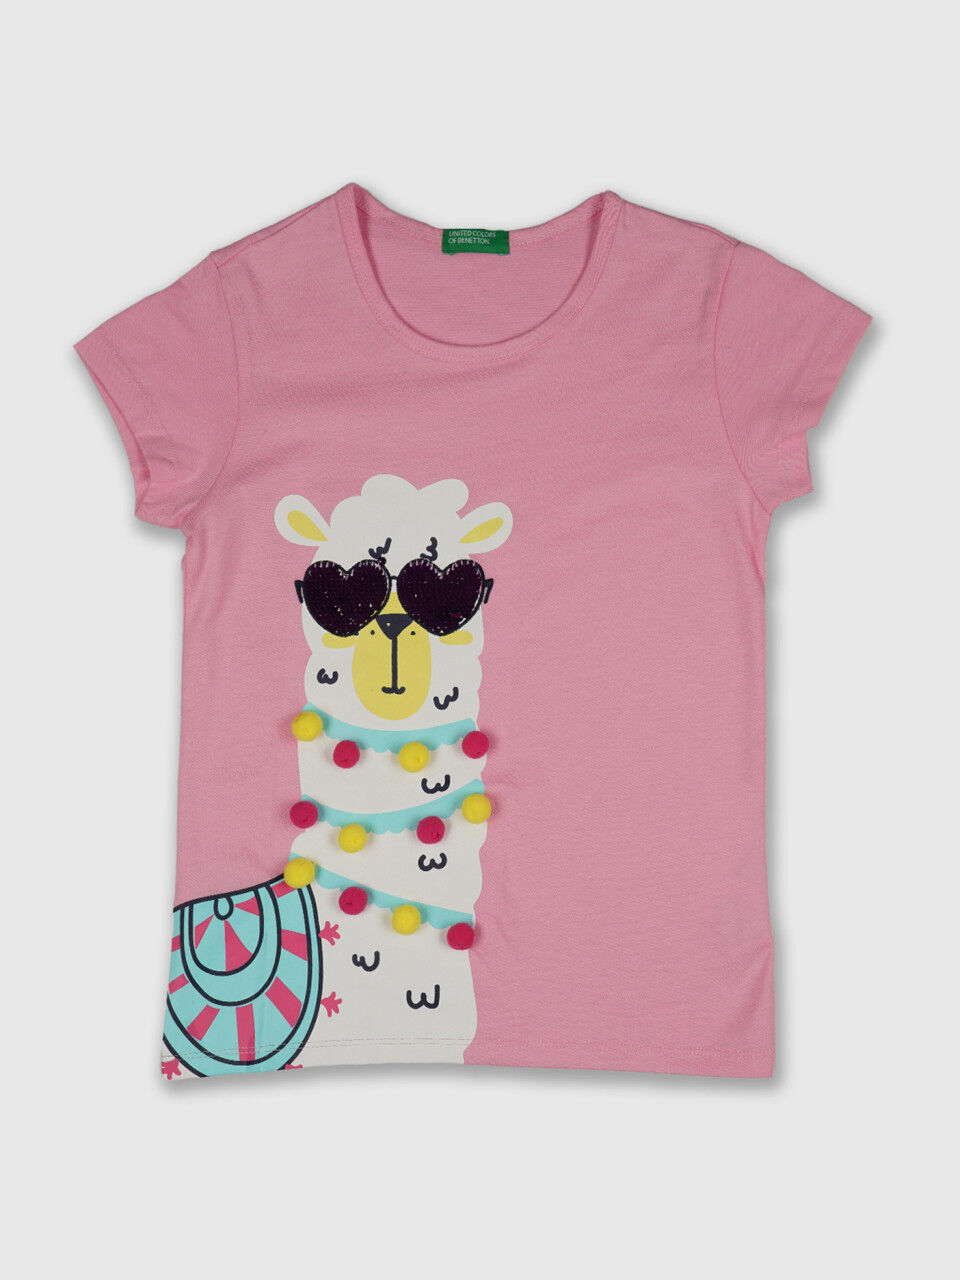 Llama with Sequin Glasses Tee